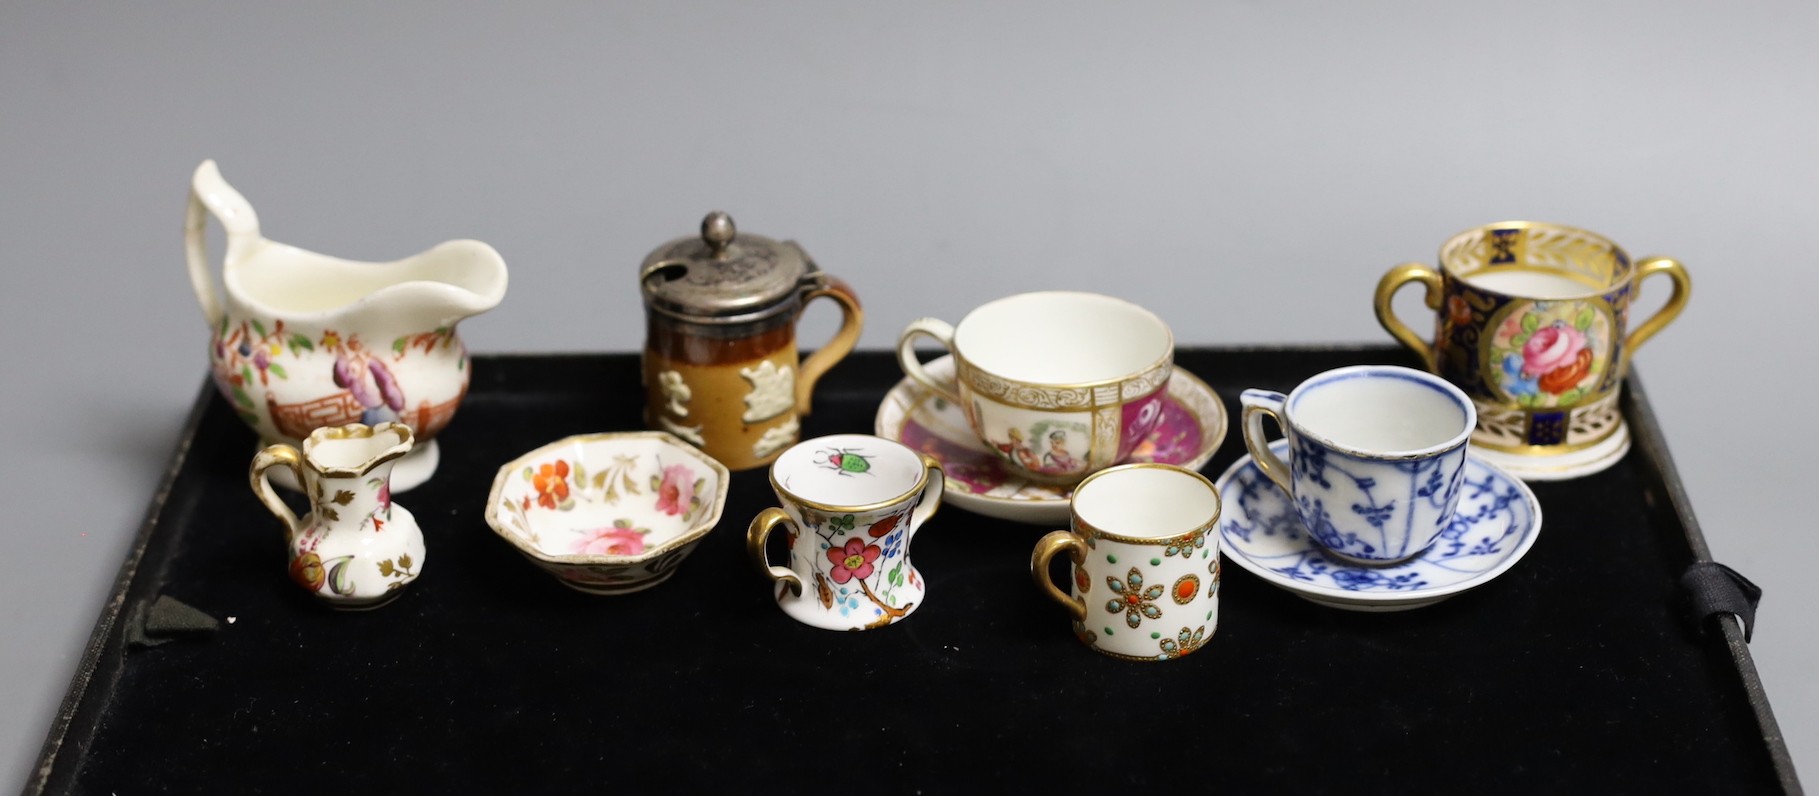 Miniatures: A Spode type Hydra jug and basin painted with flowers, a Crown Staffordshire two handled mug with flowers on a gilded blue ground, two continental cups and saucer one with Watteauesque scenes, the other in bl